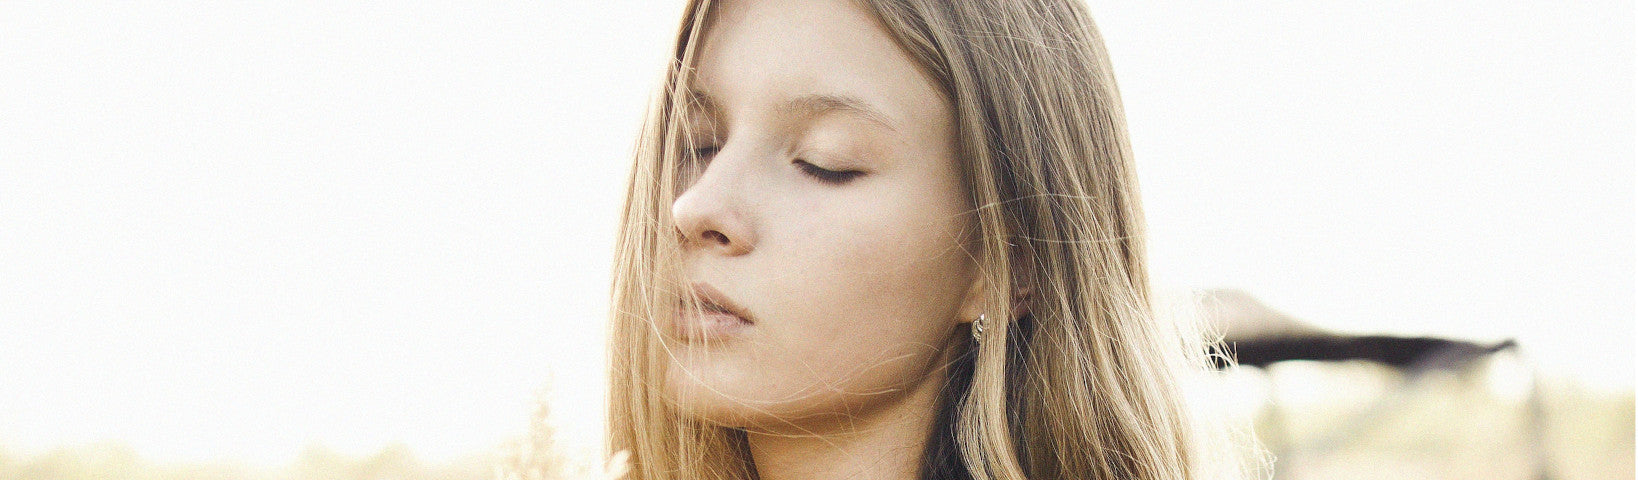 EVERYTHING YOU NEED TO KNOW ABOUT FACE OILS